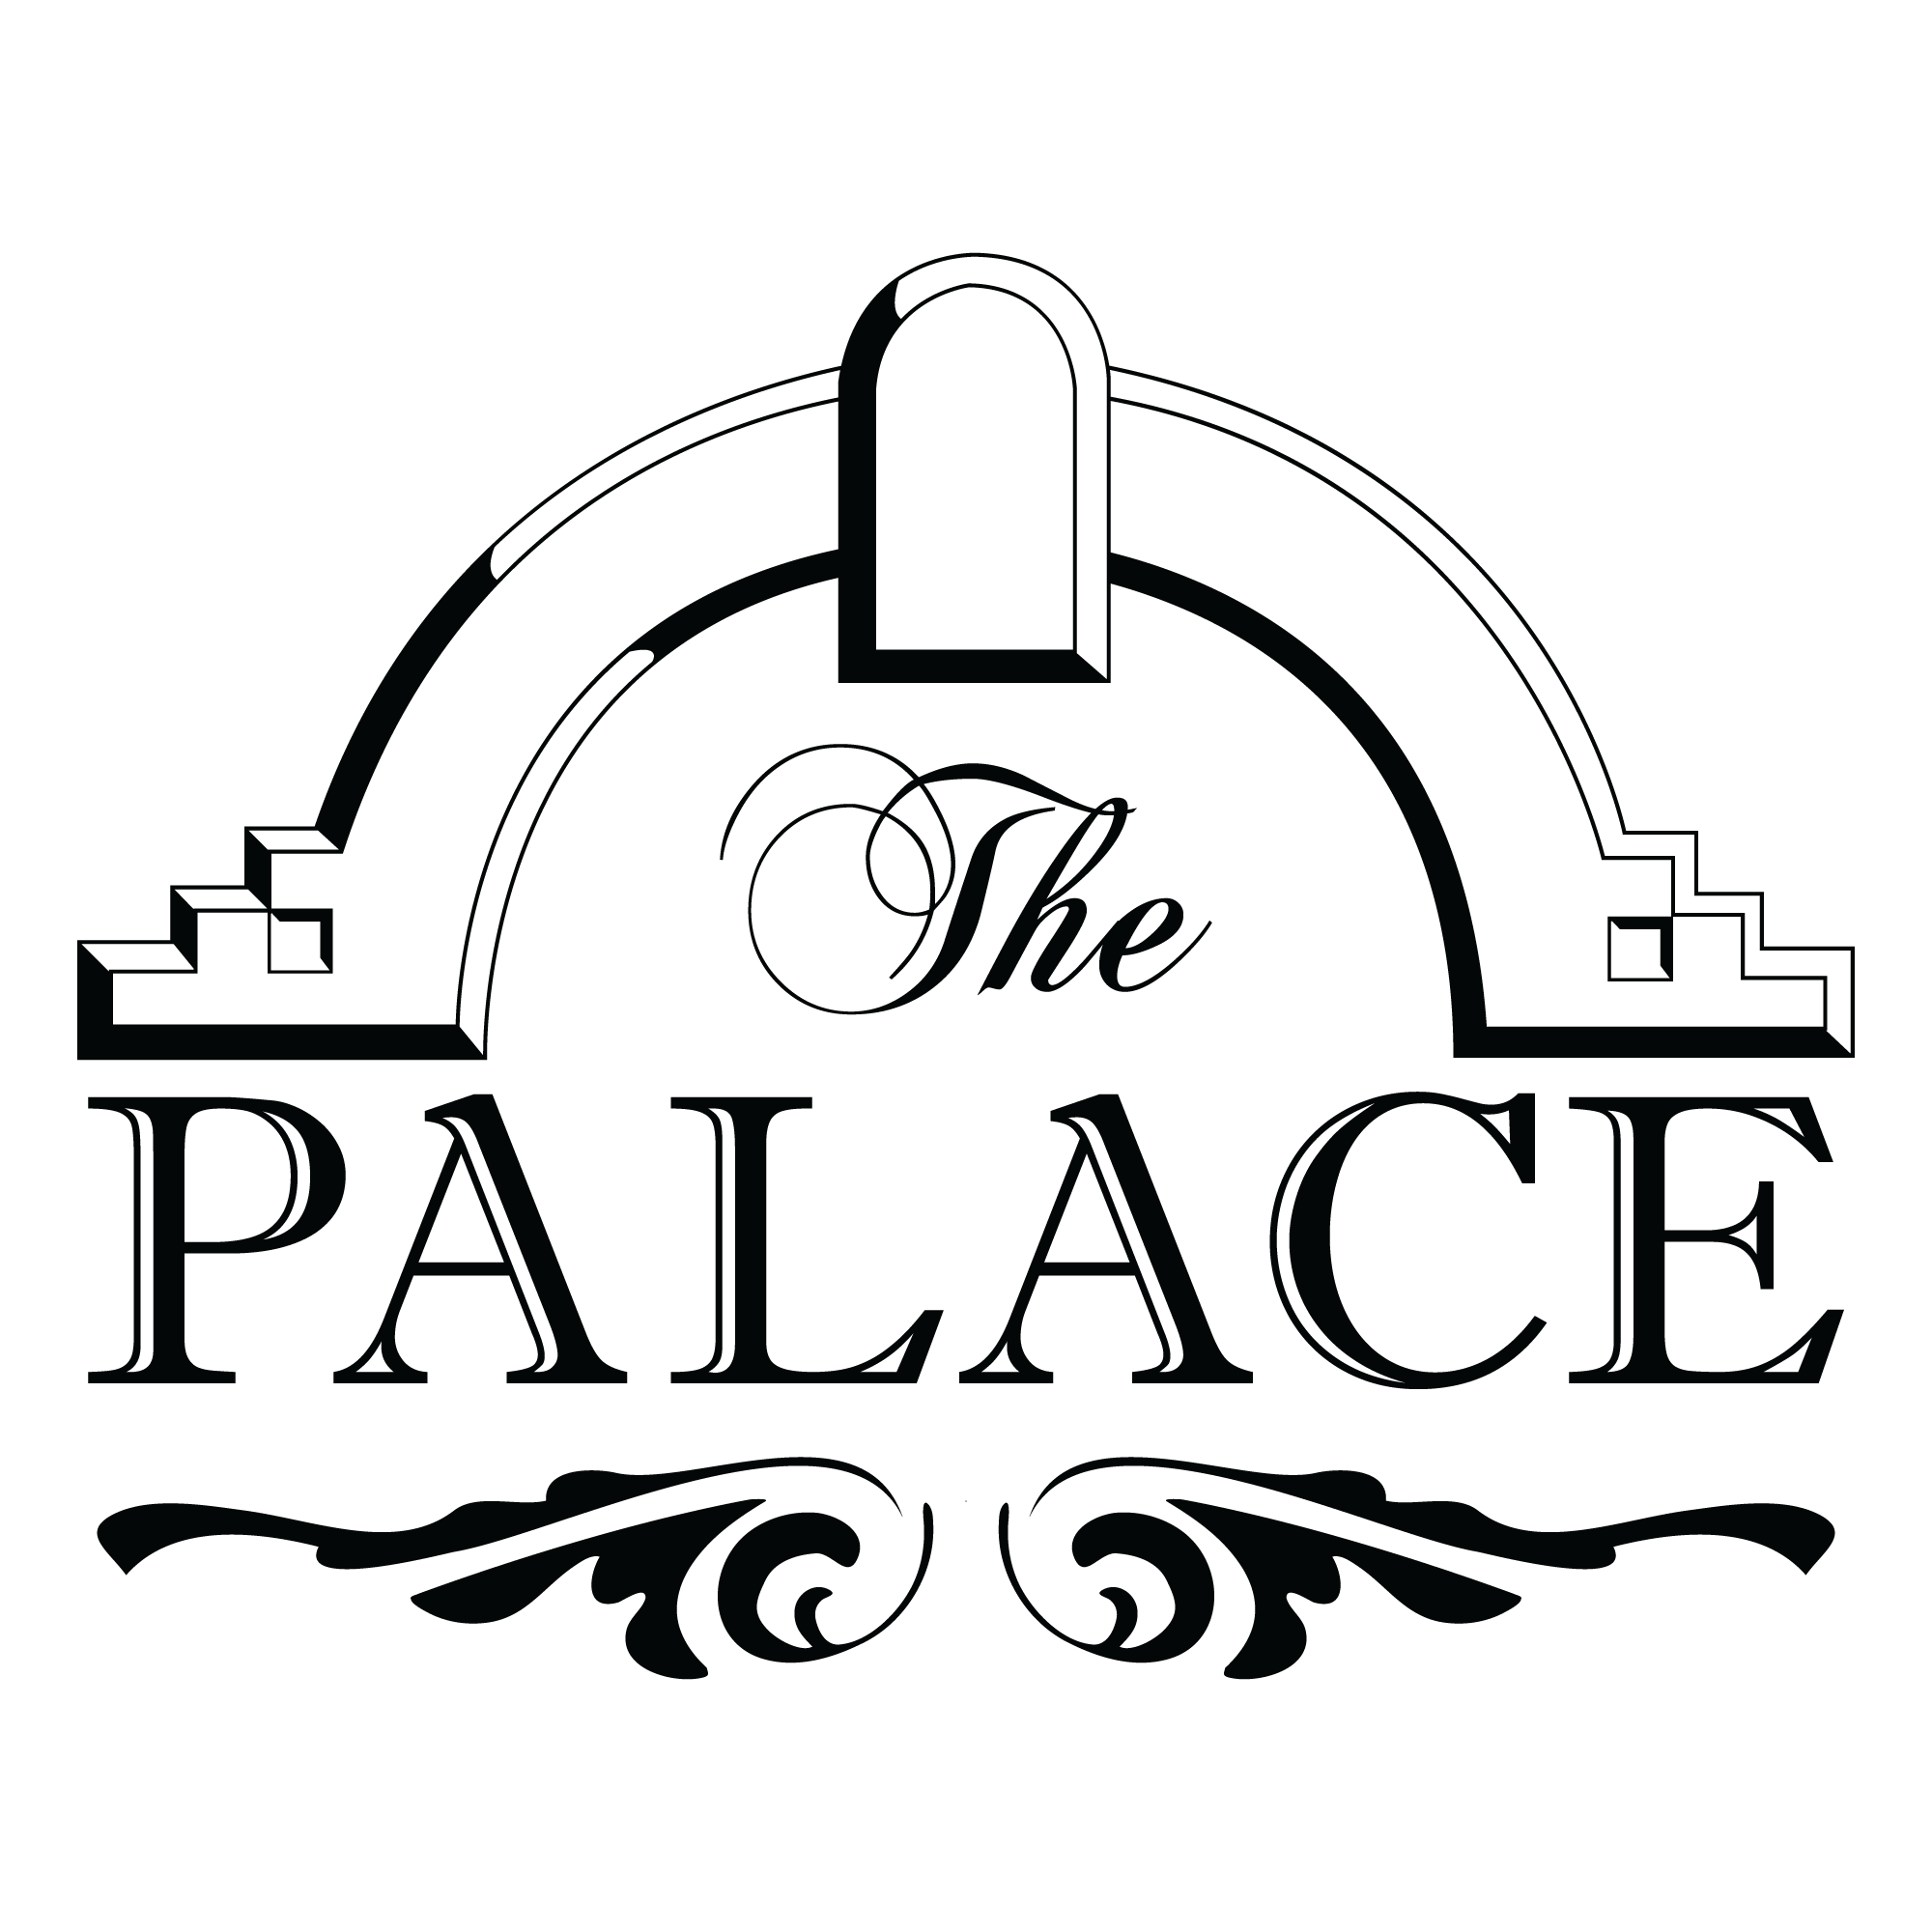 1 The Palace (Tier 4)